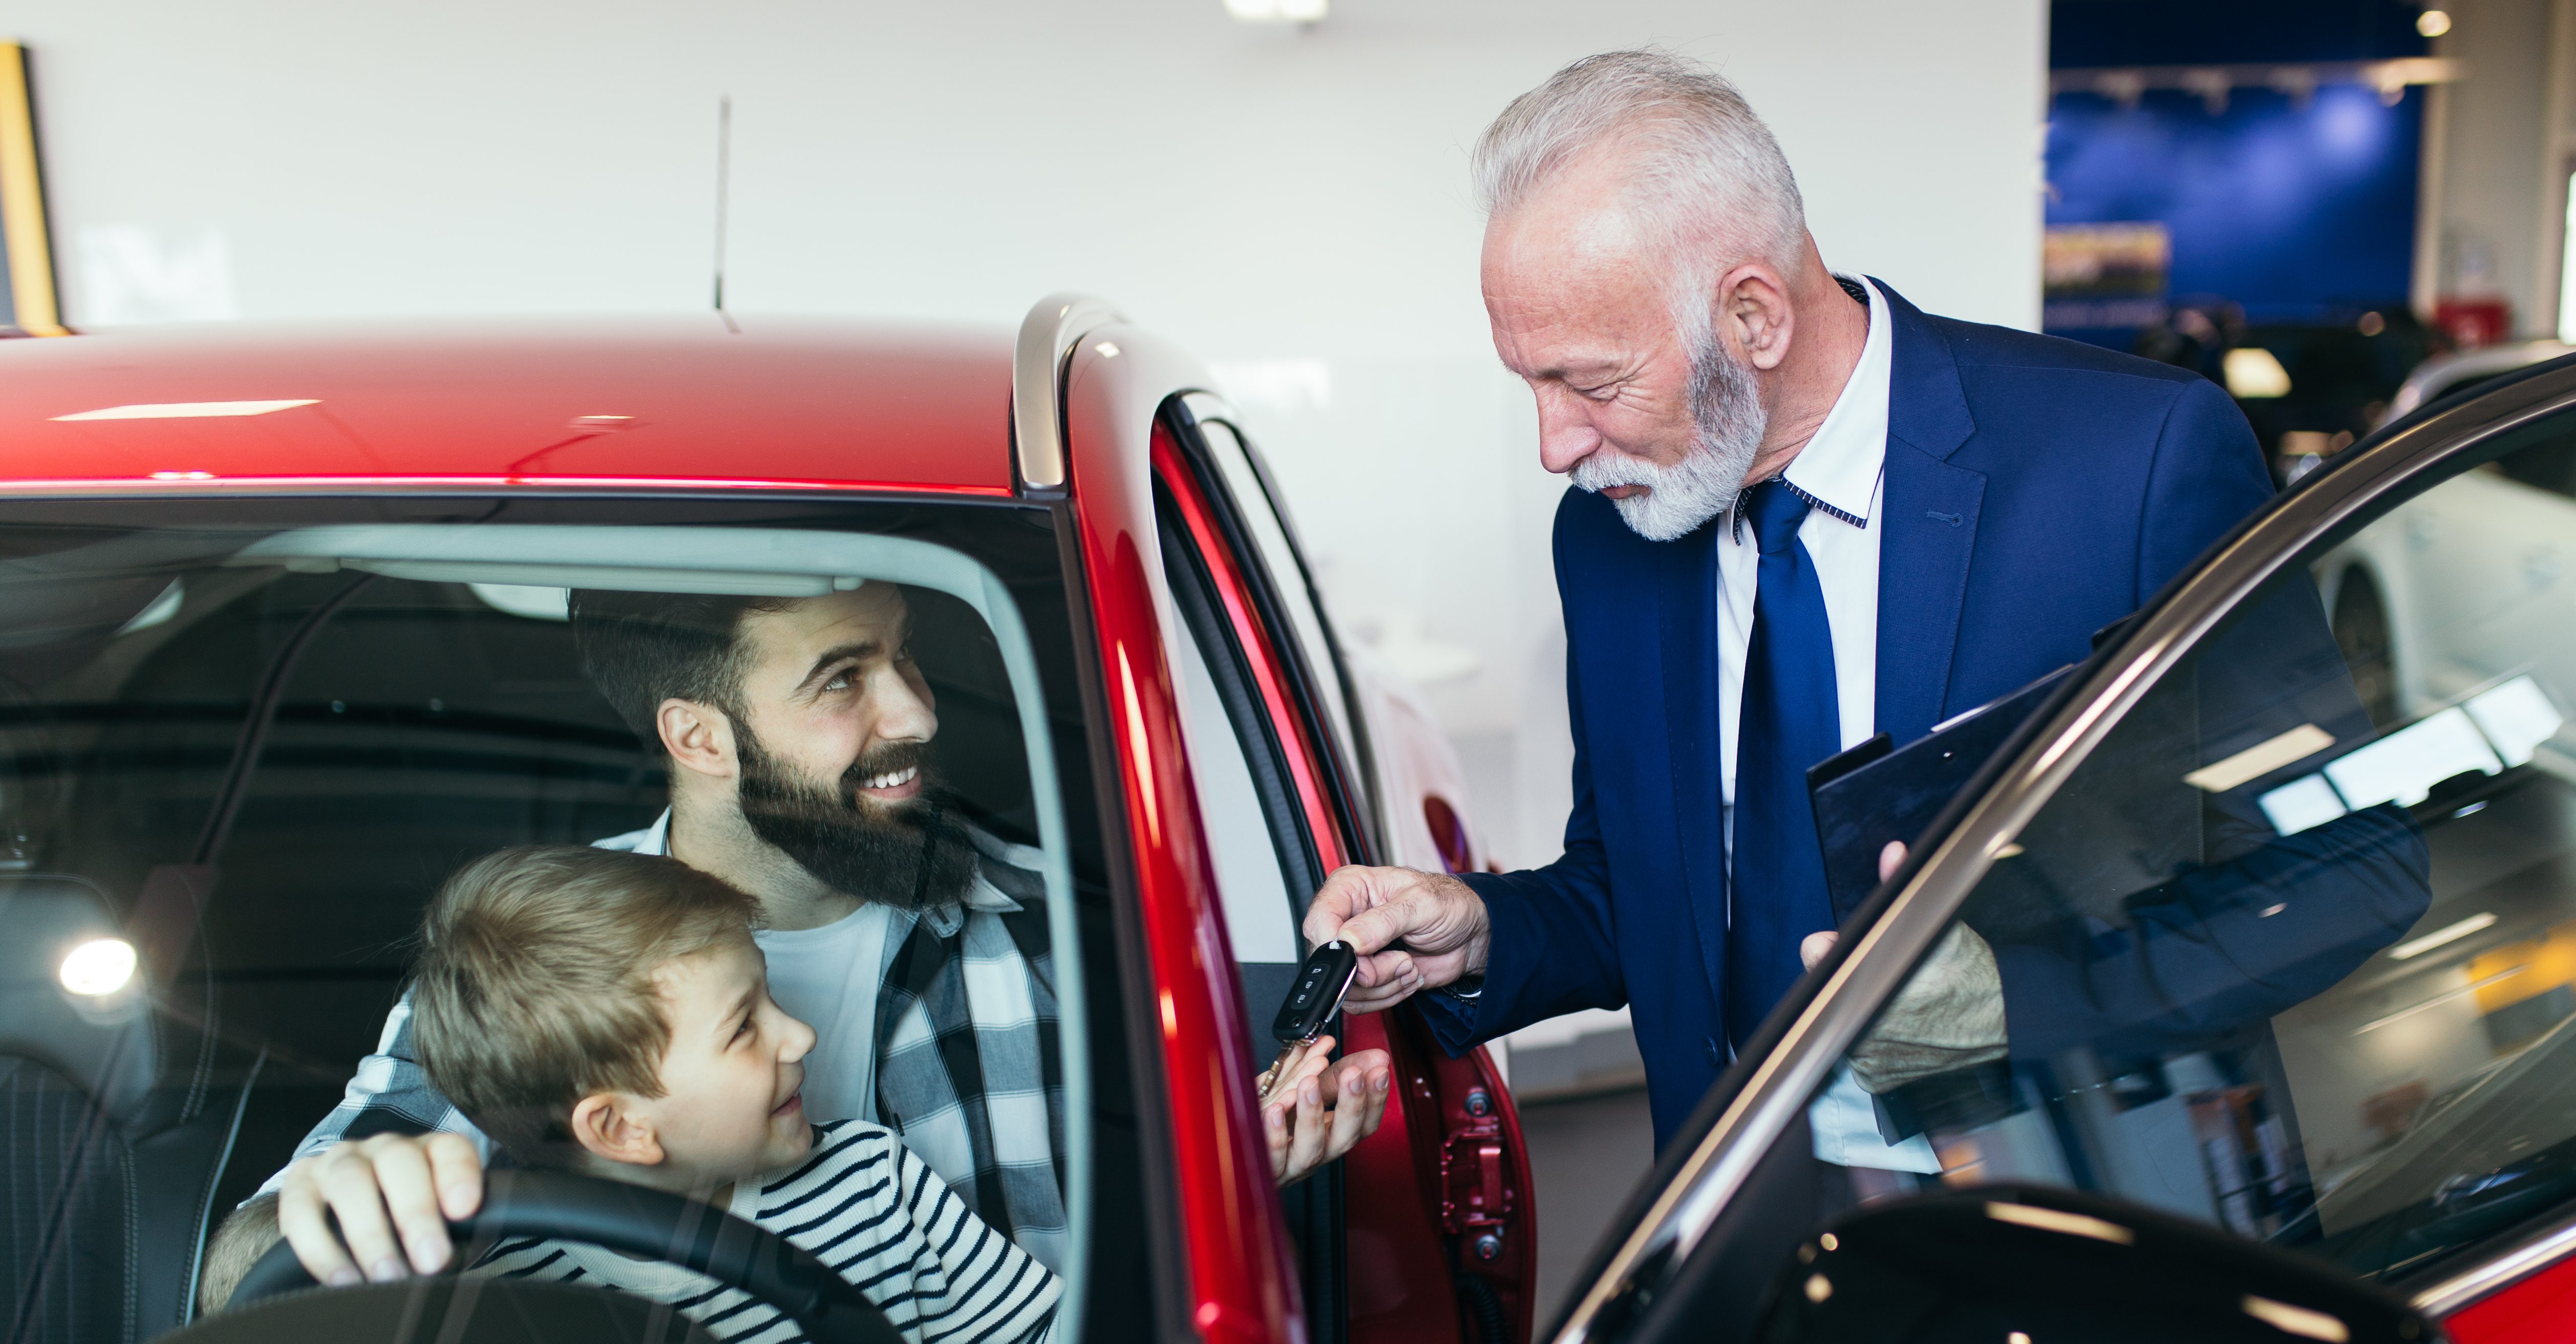 Father and son talking with a salesman about buying a new car at the car showroom.